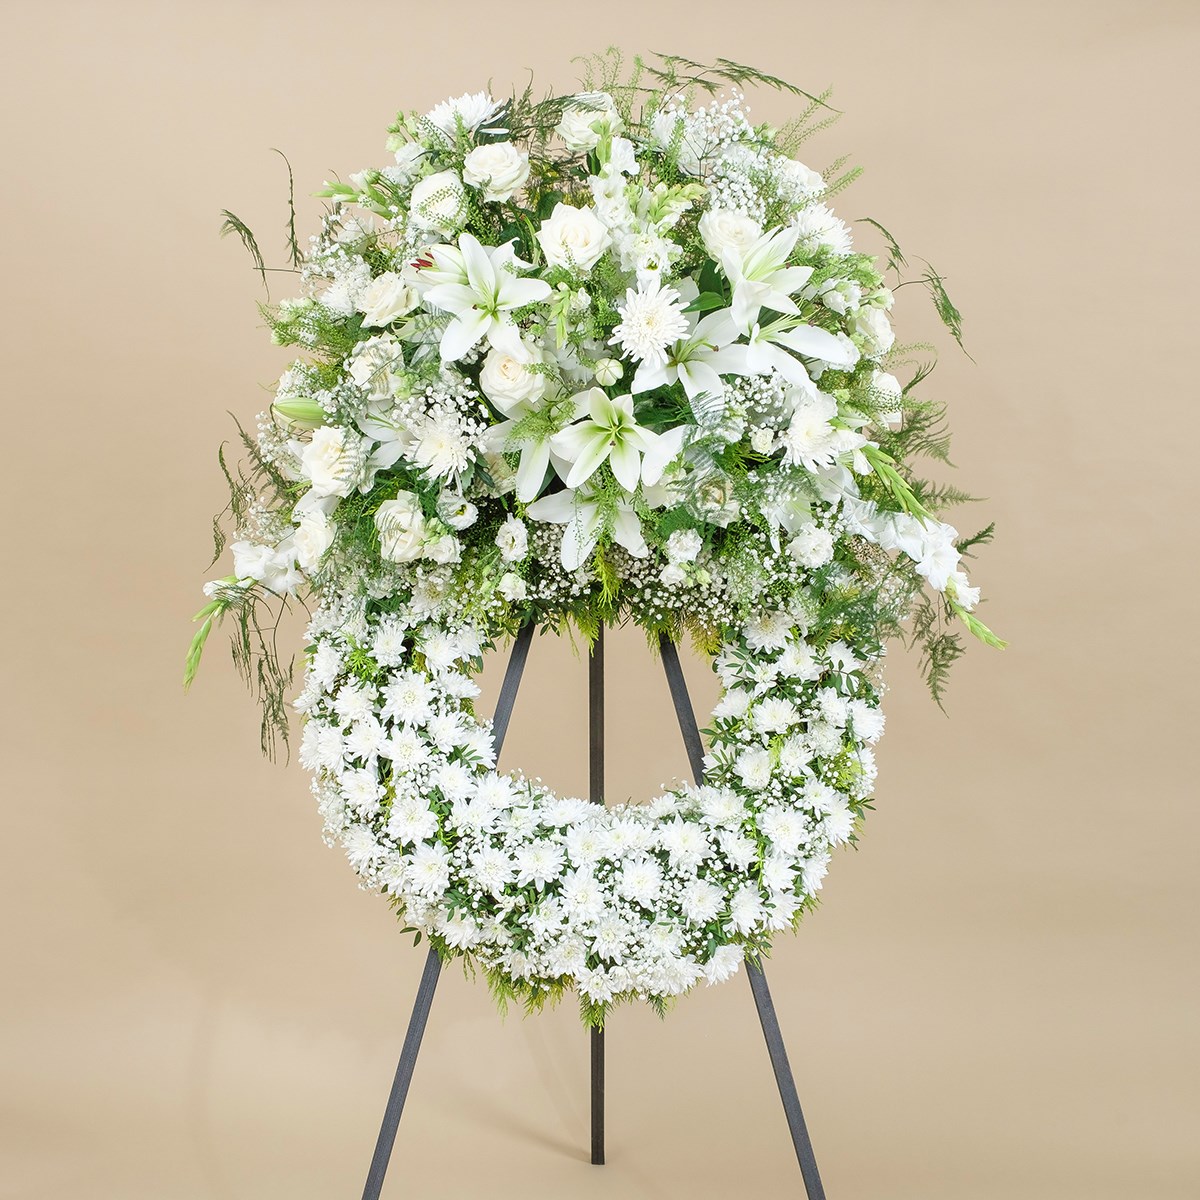 product image for Funeral wreath with white flowers